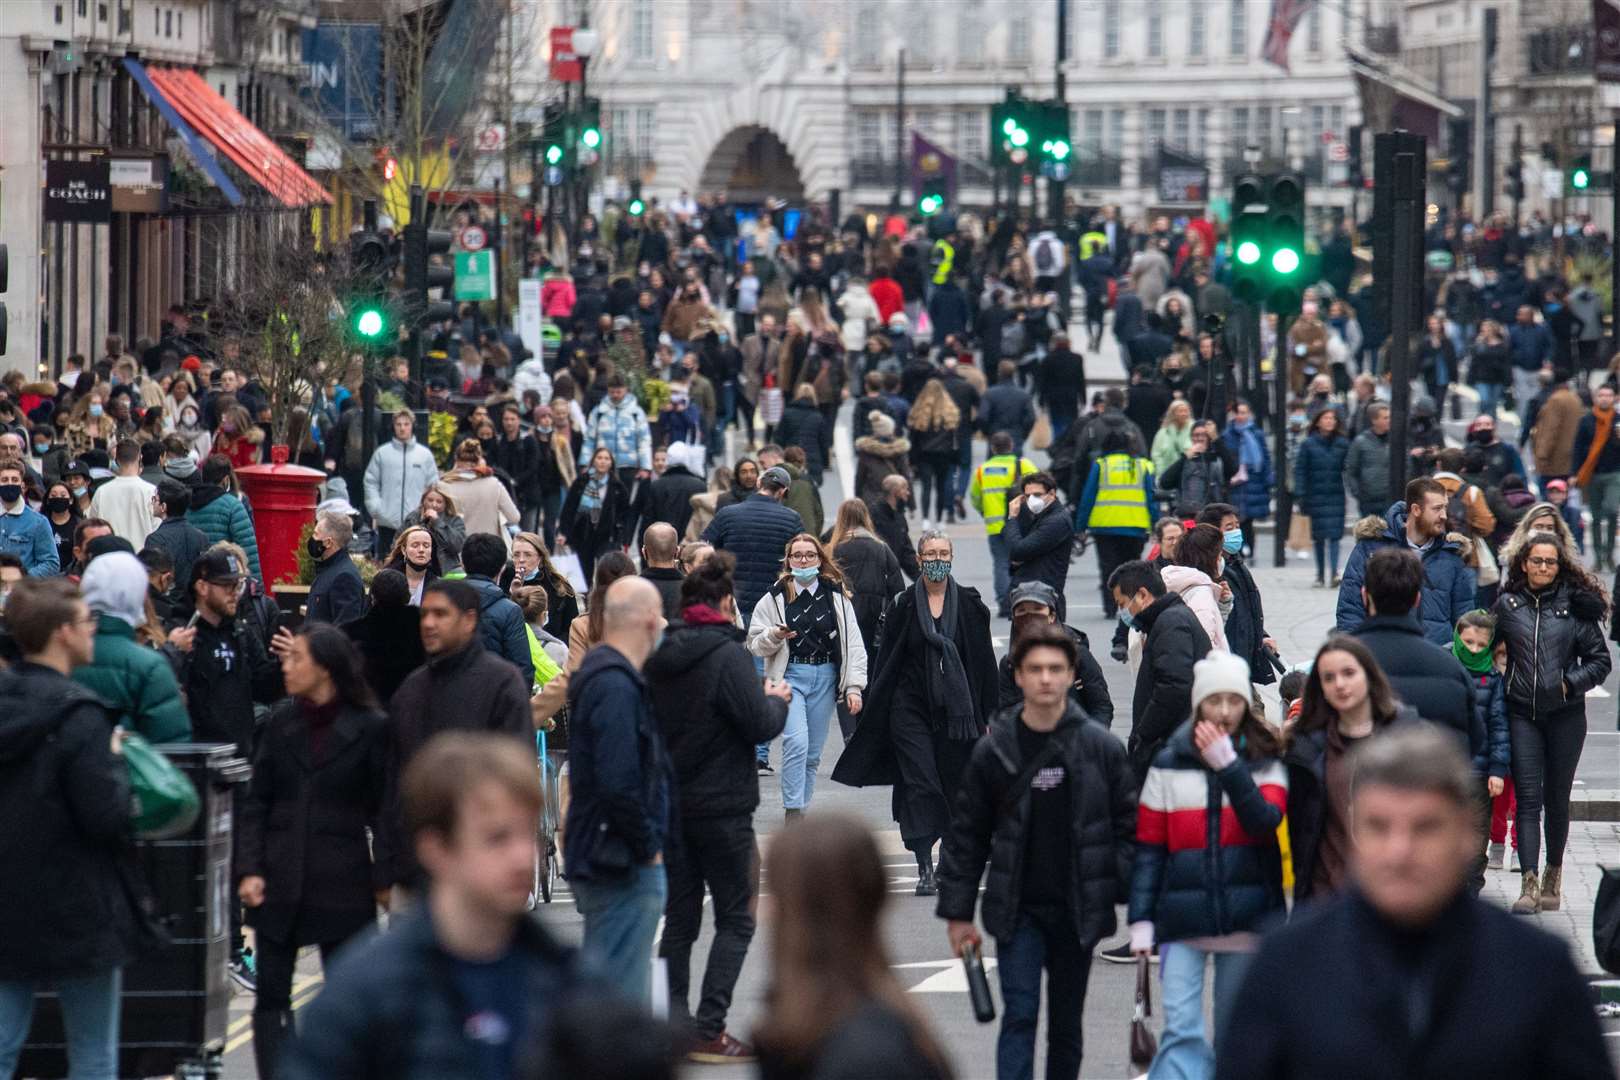 Shoppers on Regent Street in central London on Saturday (Dominic Lipinski/PA)